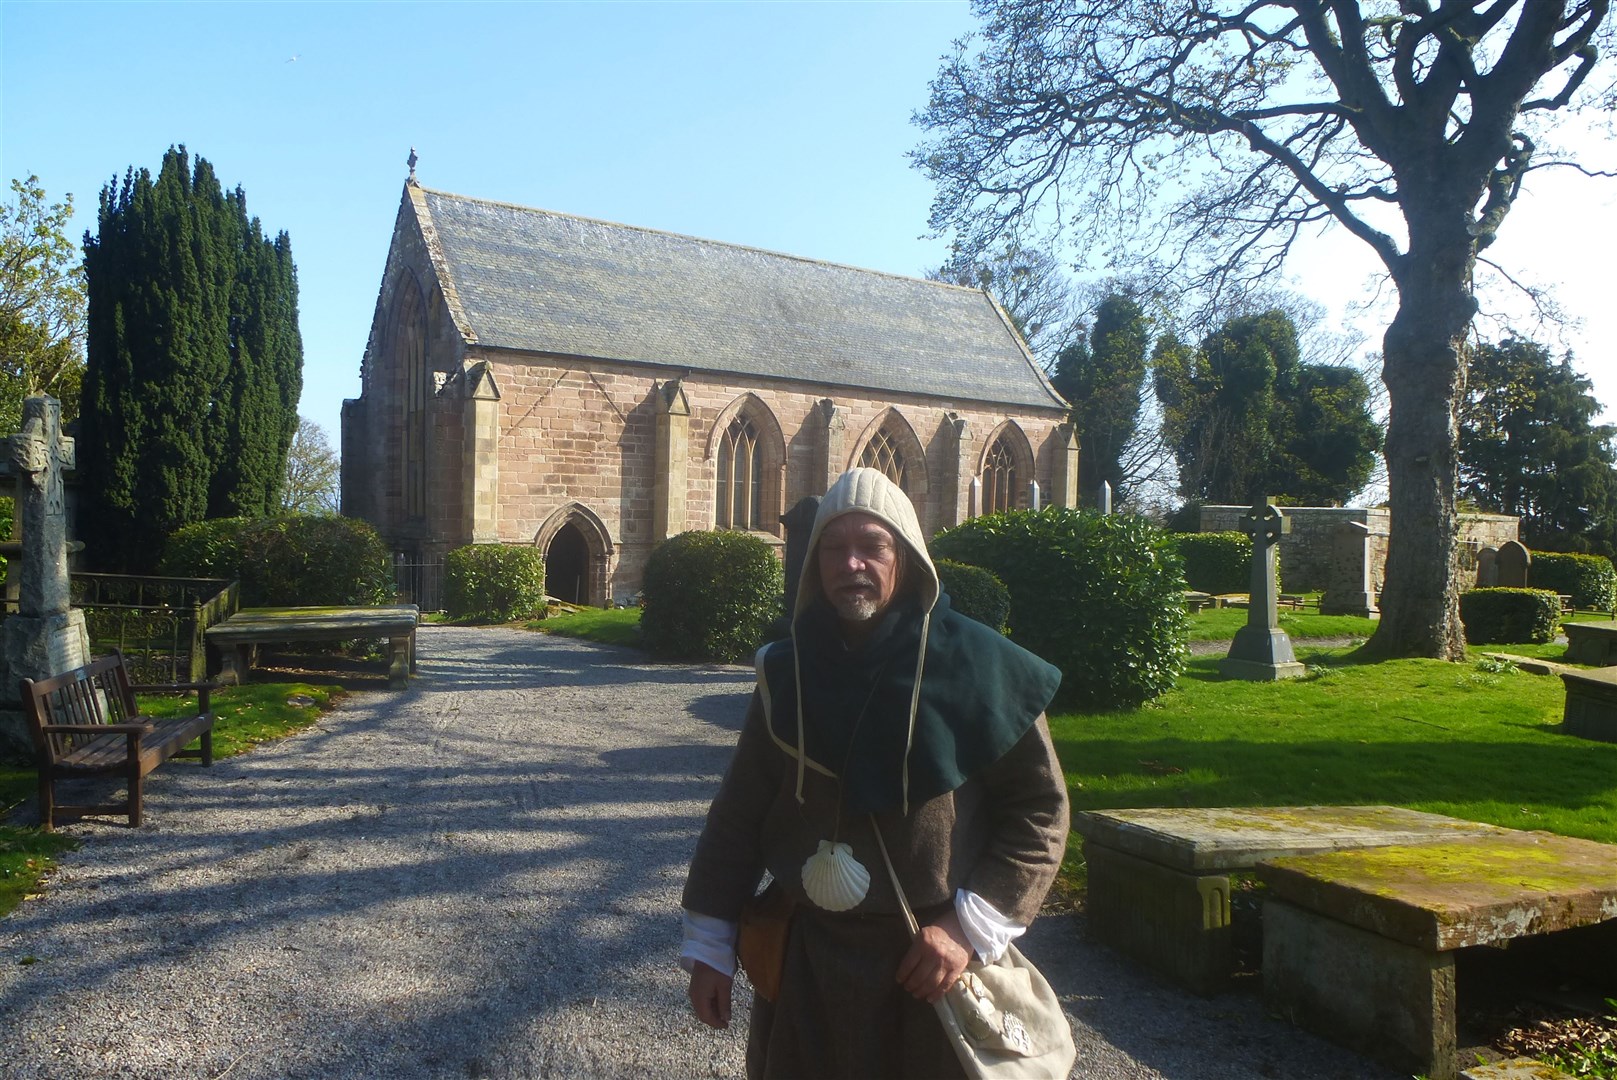 Living history enthusiast Derek Stewart followed a route taken by James IV in making a pilgrimage to Tain.